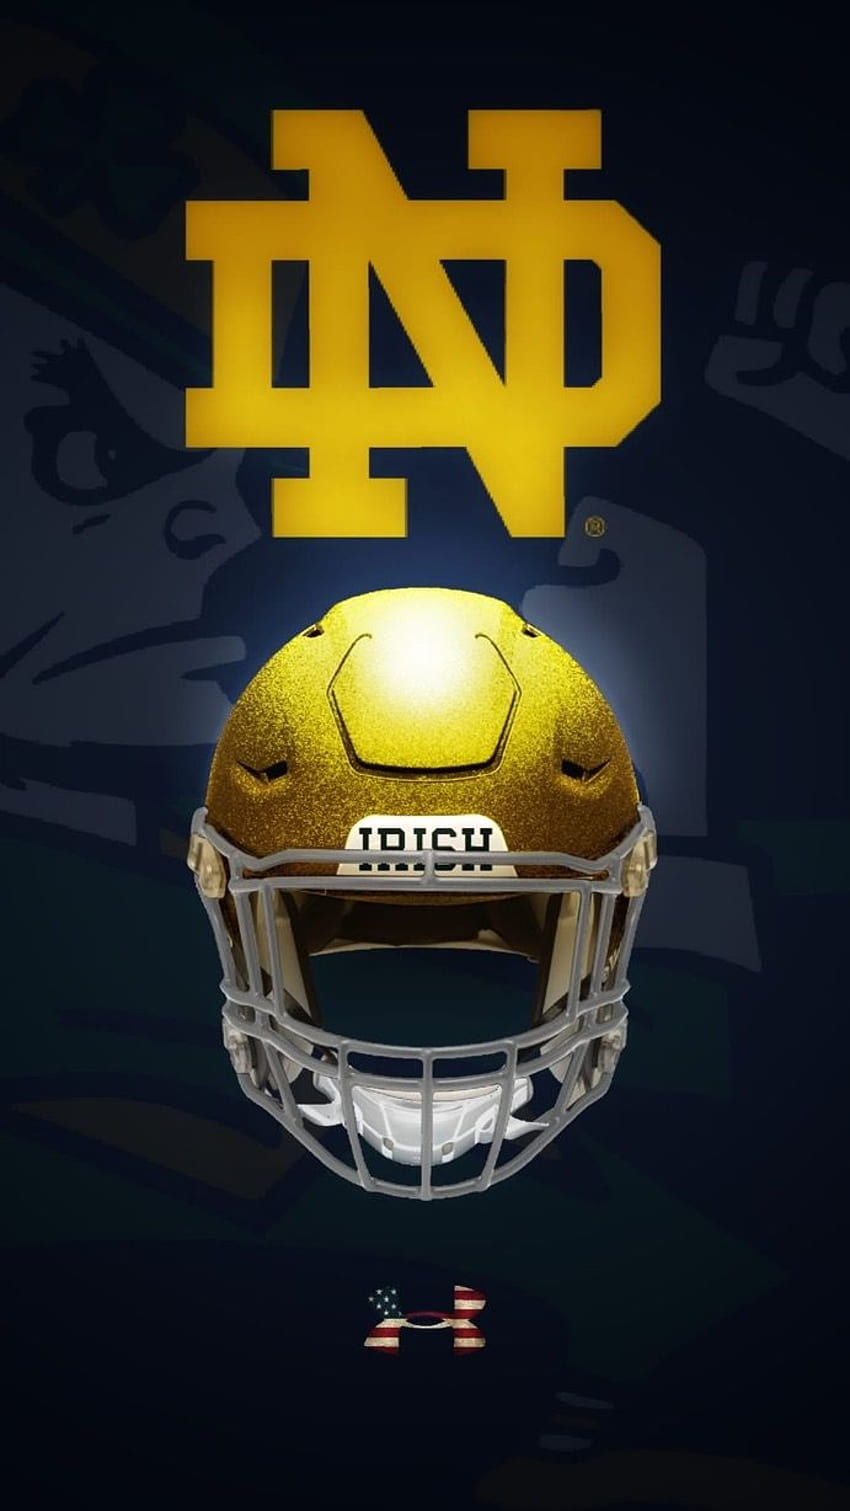 Wallpaper Wednesday uNDefeated  Notre Dame Football  Facebook